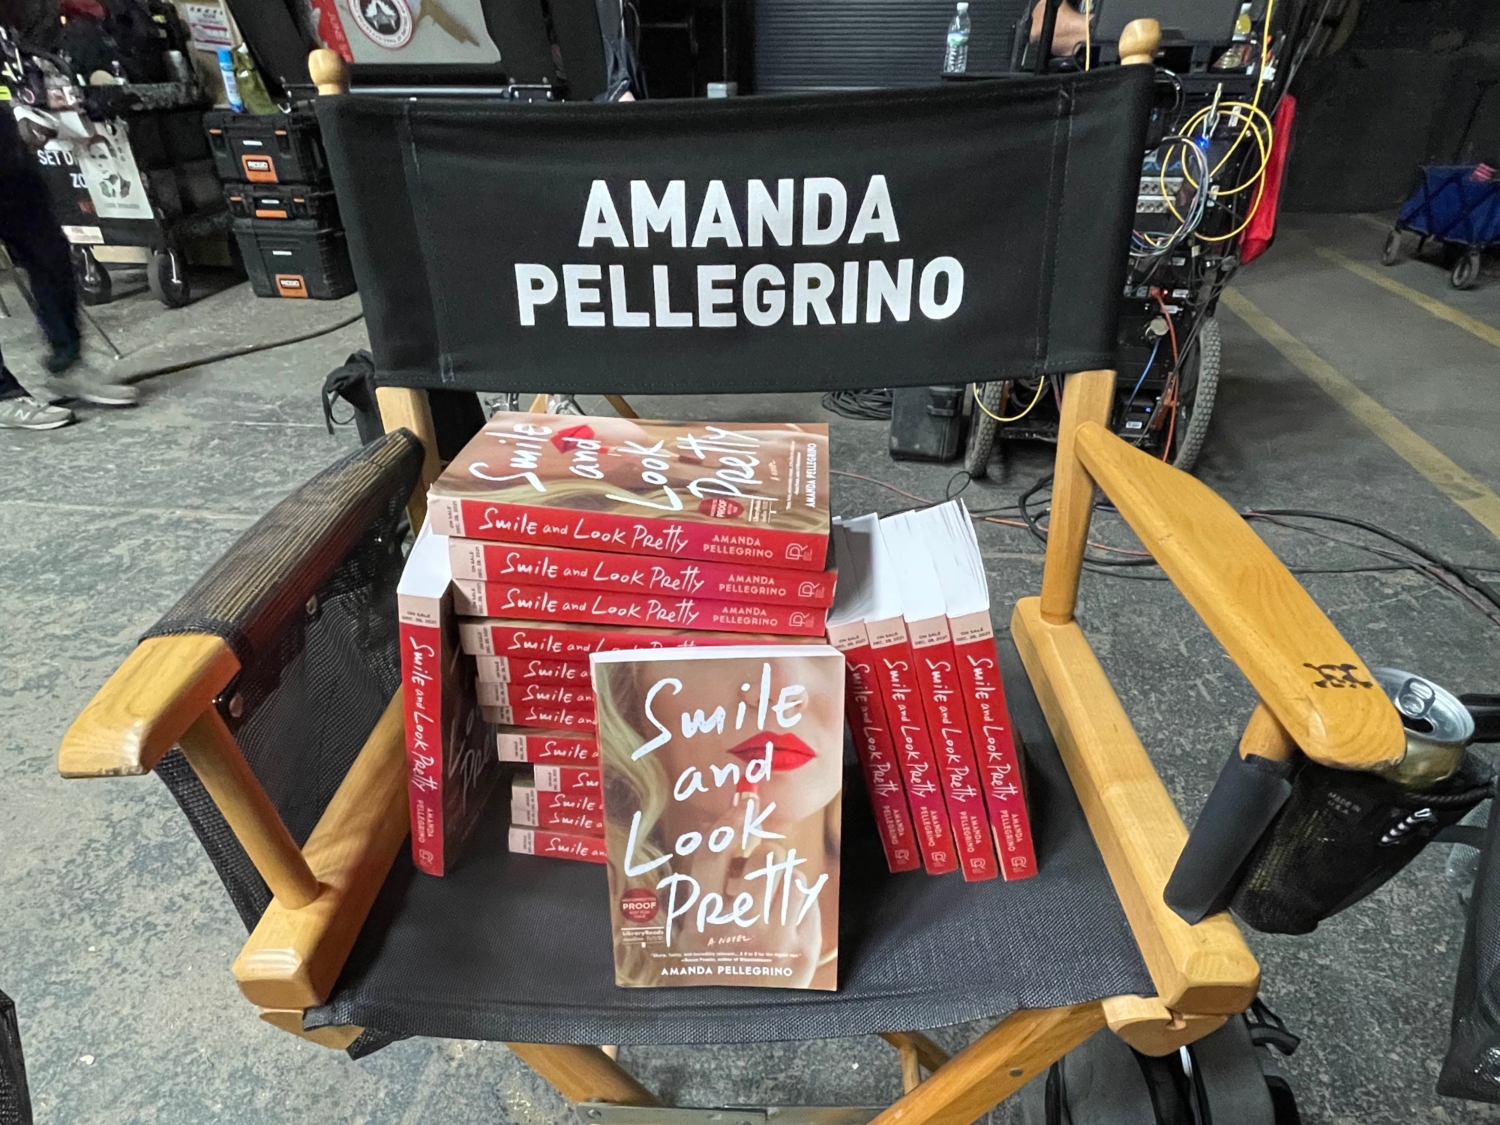 A stack of Amanda's books on her chair on set